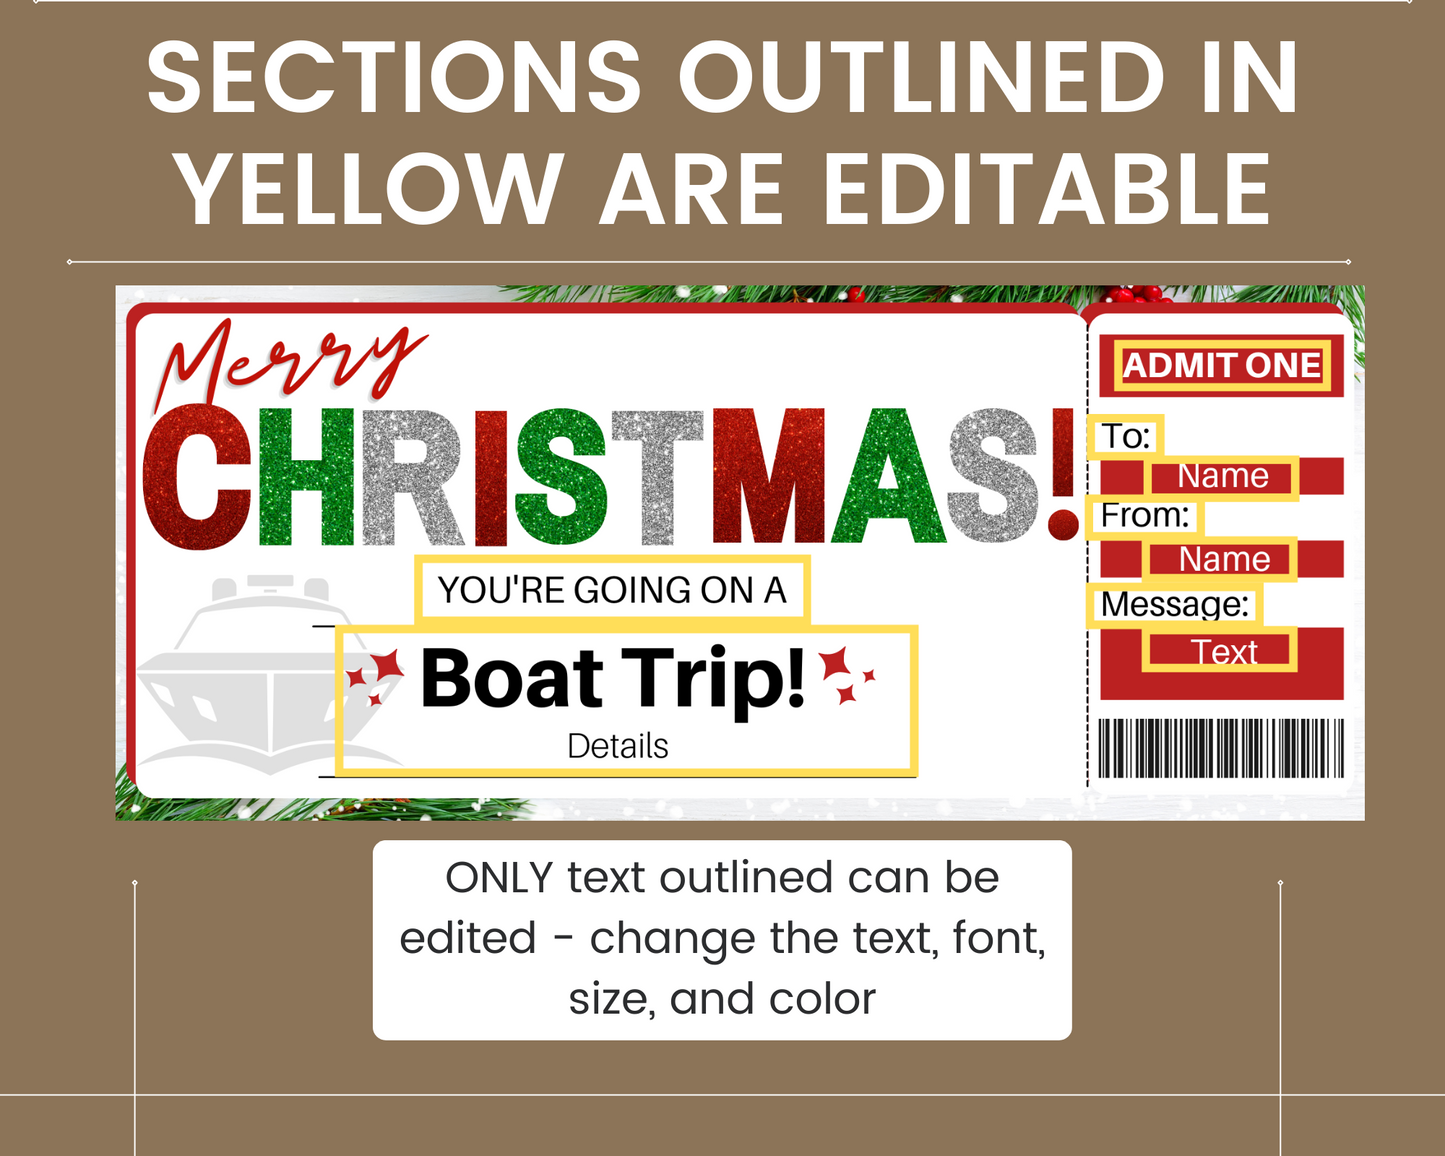 Christmas Boat Trip Ticket Template